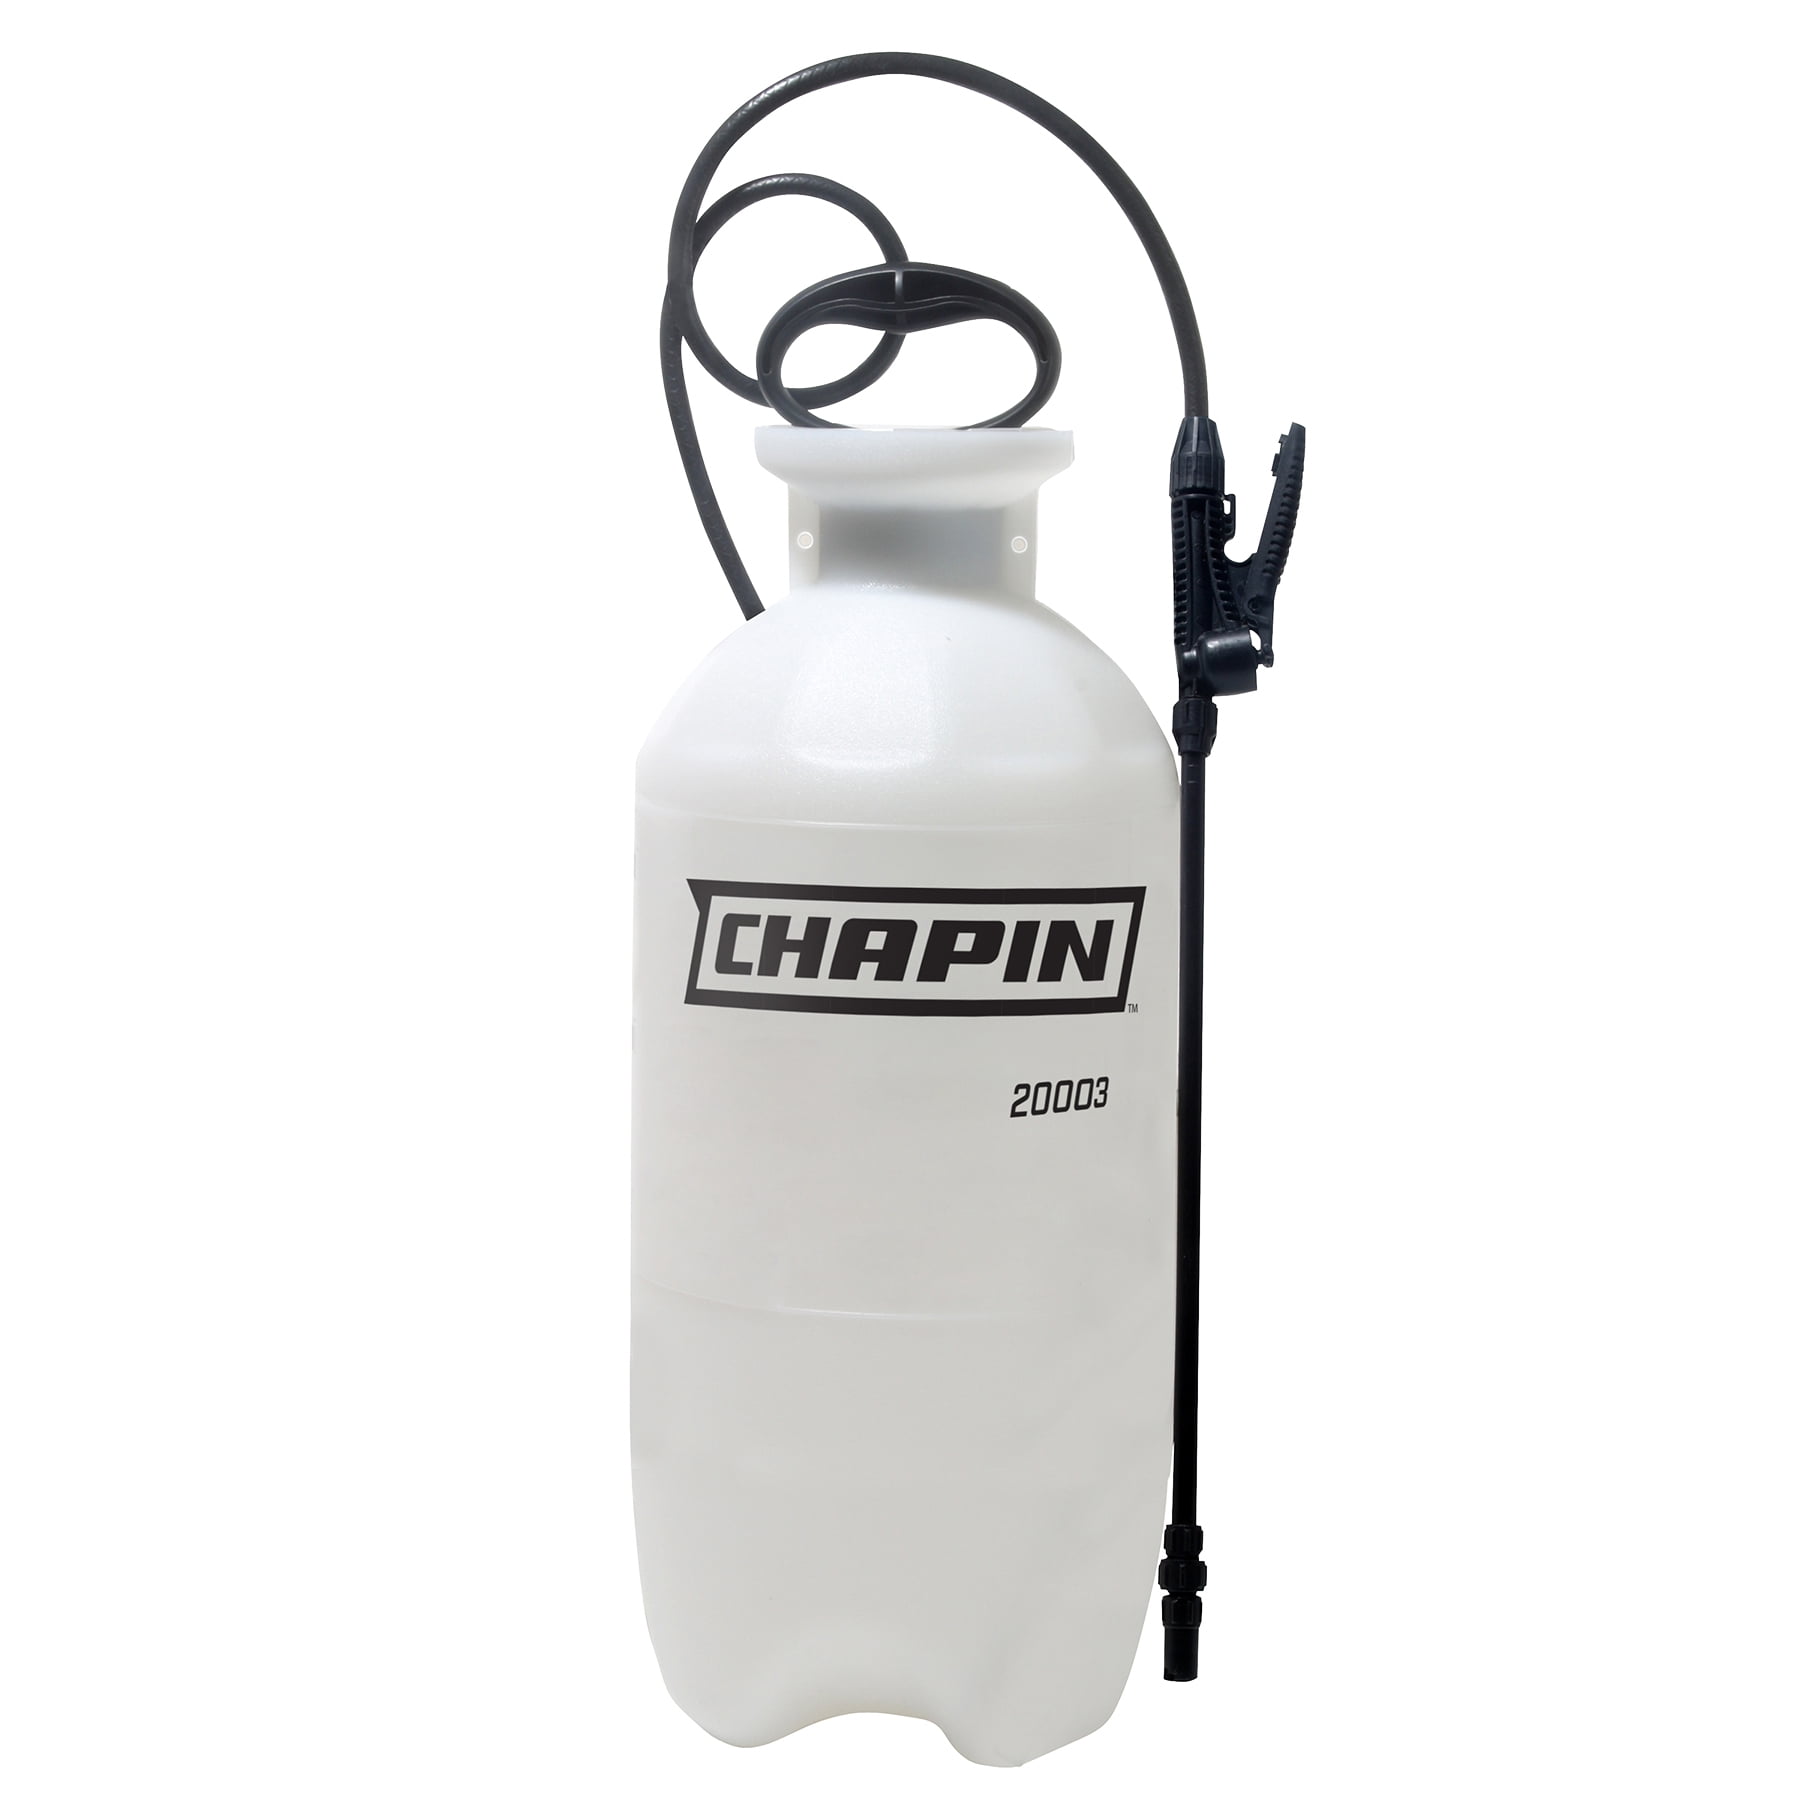 1 Gallon CHAPIN Lawn and Garden Sprayer Home Project Pest Control Fertilizers 